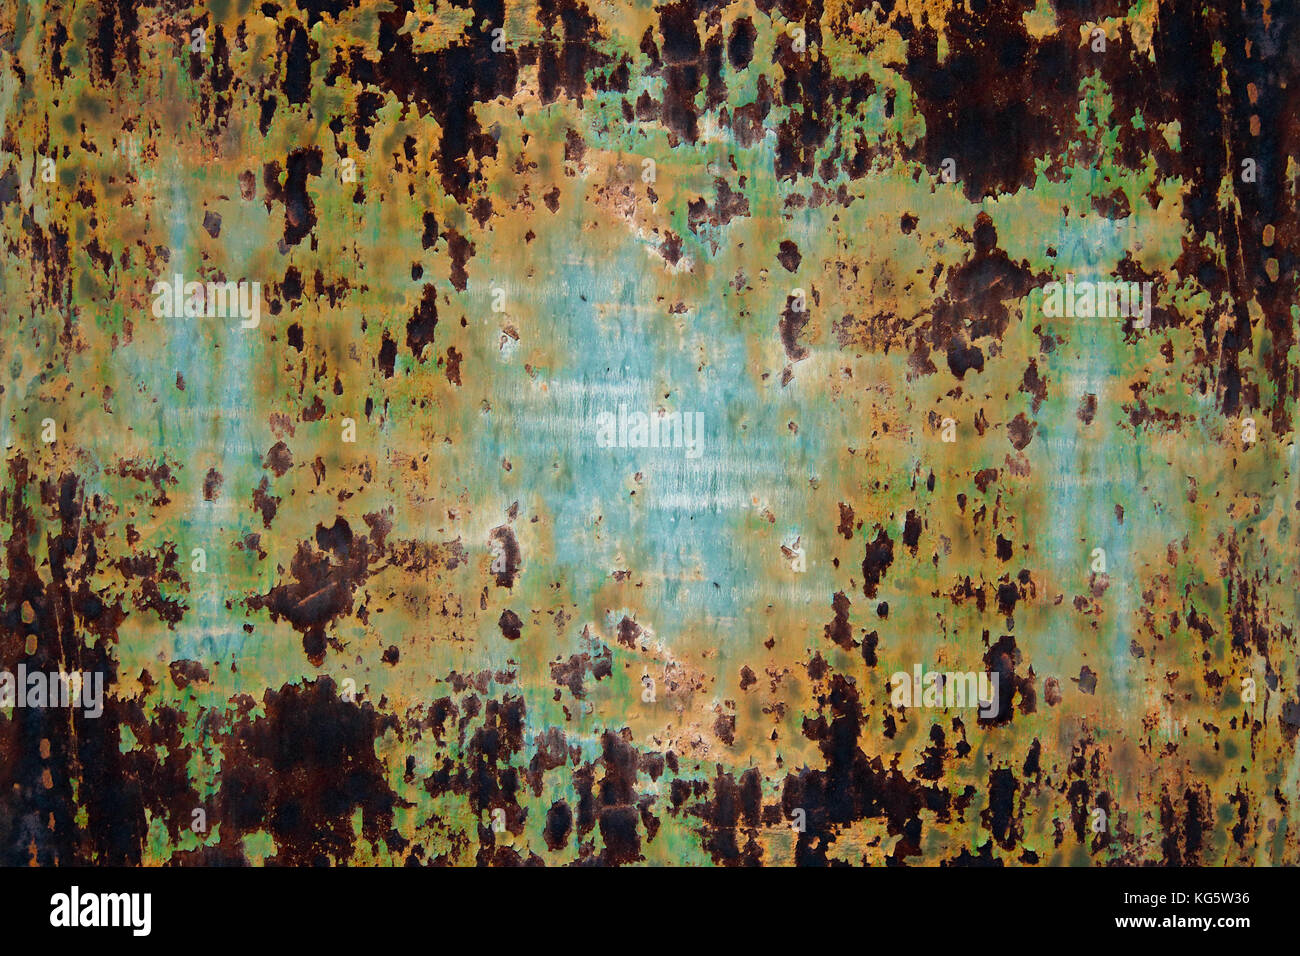 Flaking paint from the rusty metal surface Stock Photo